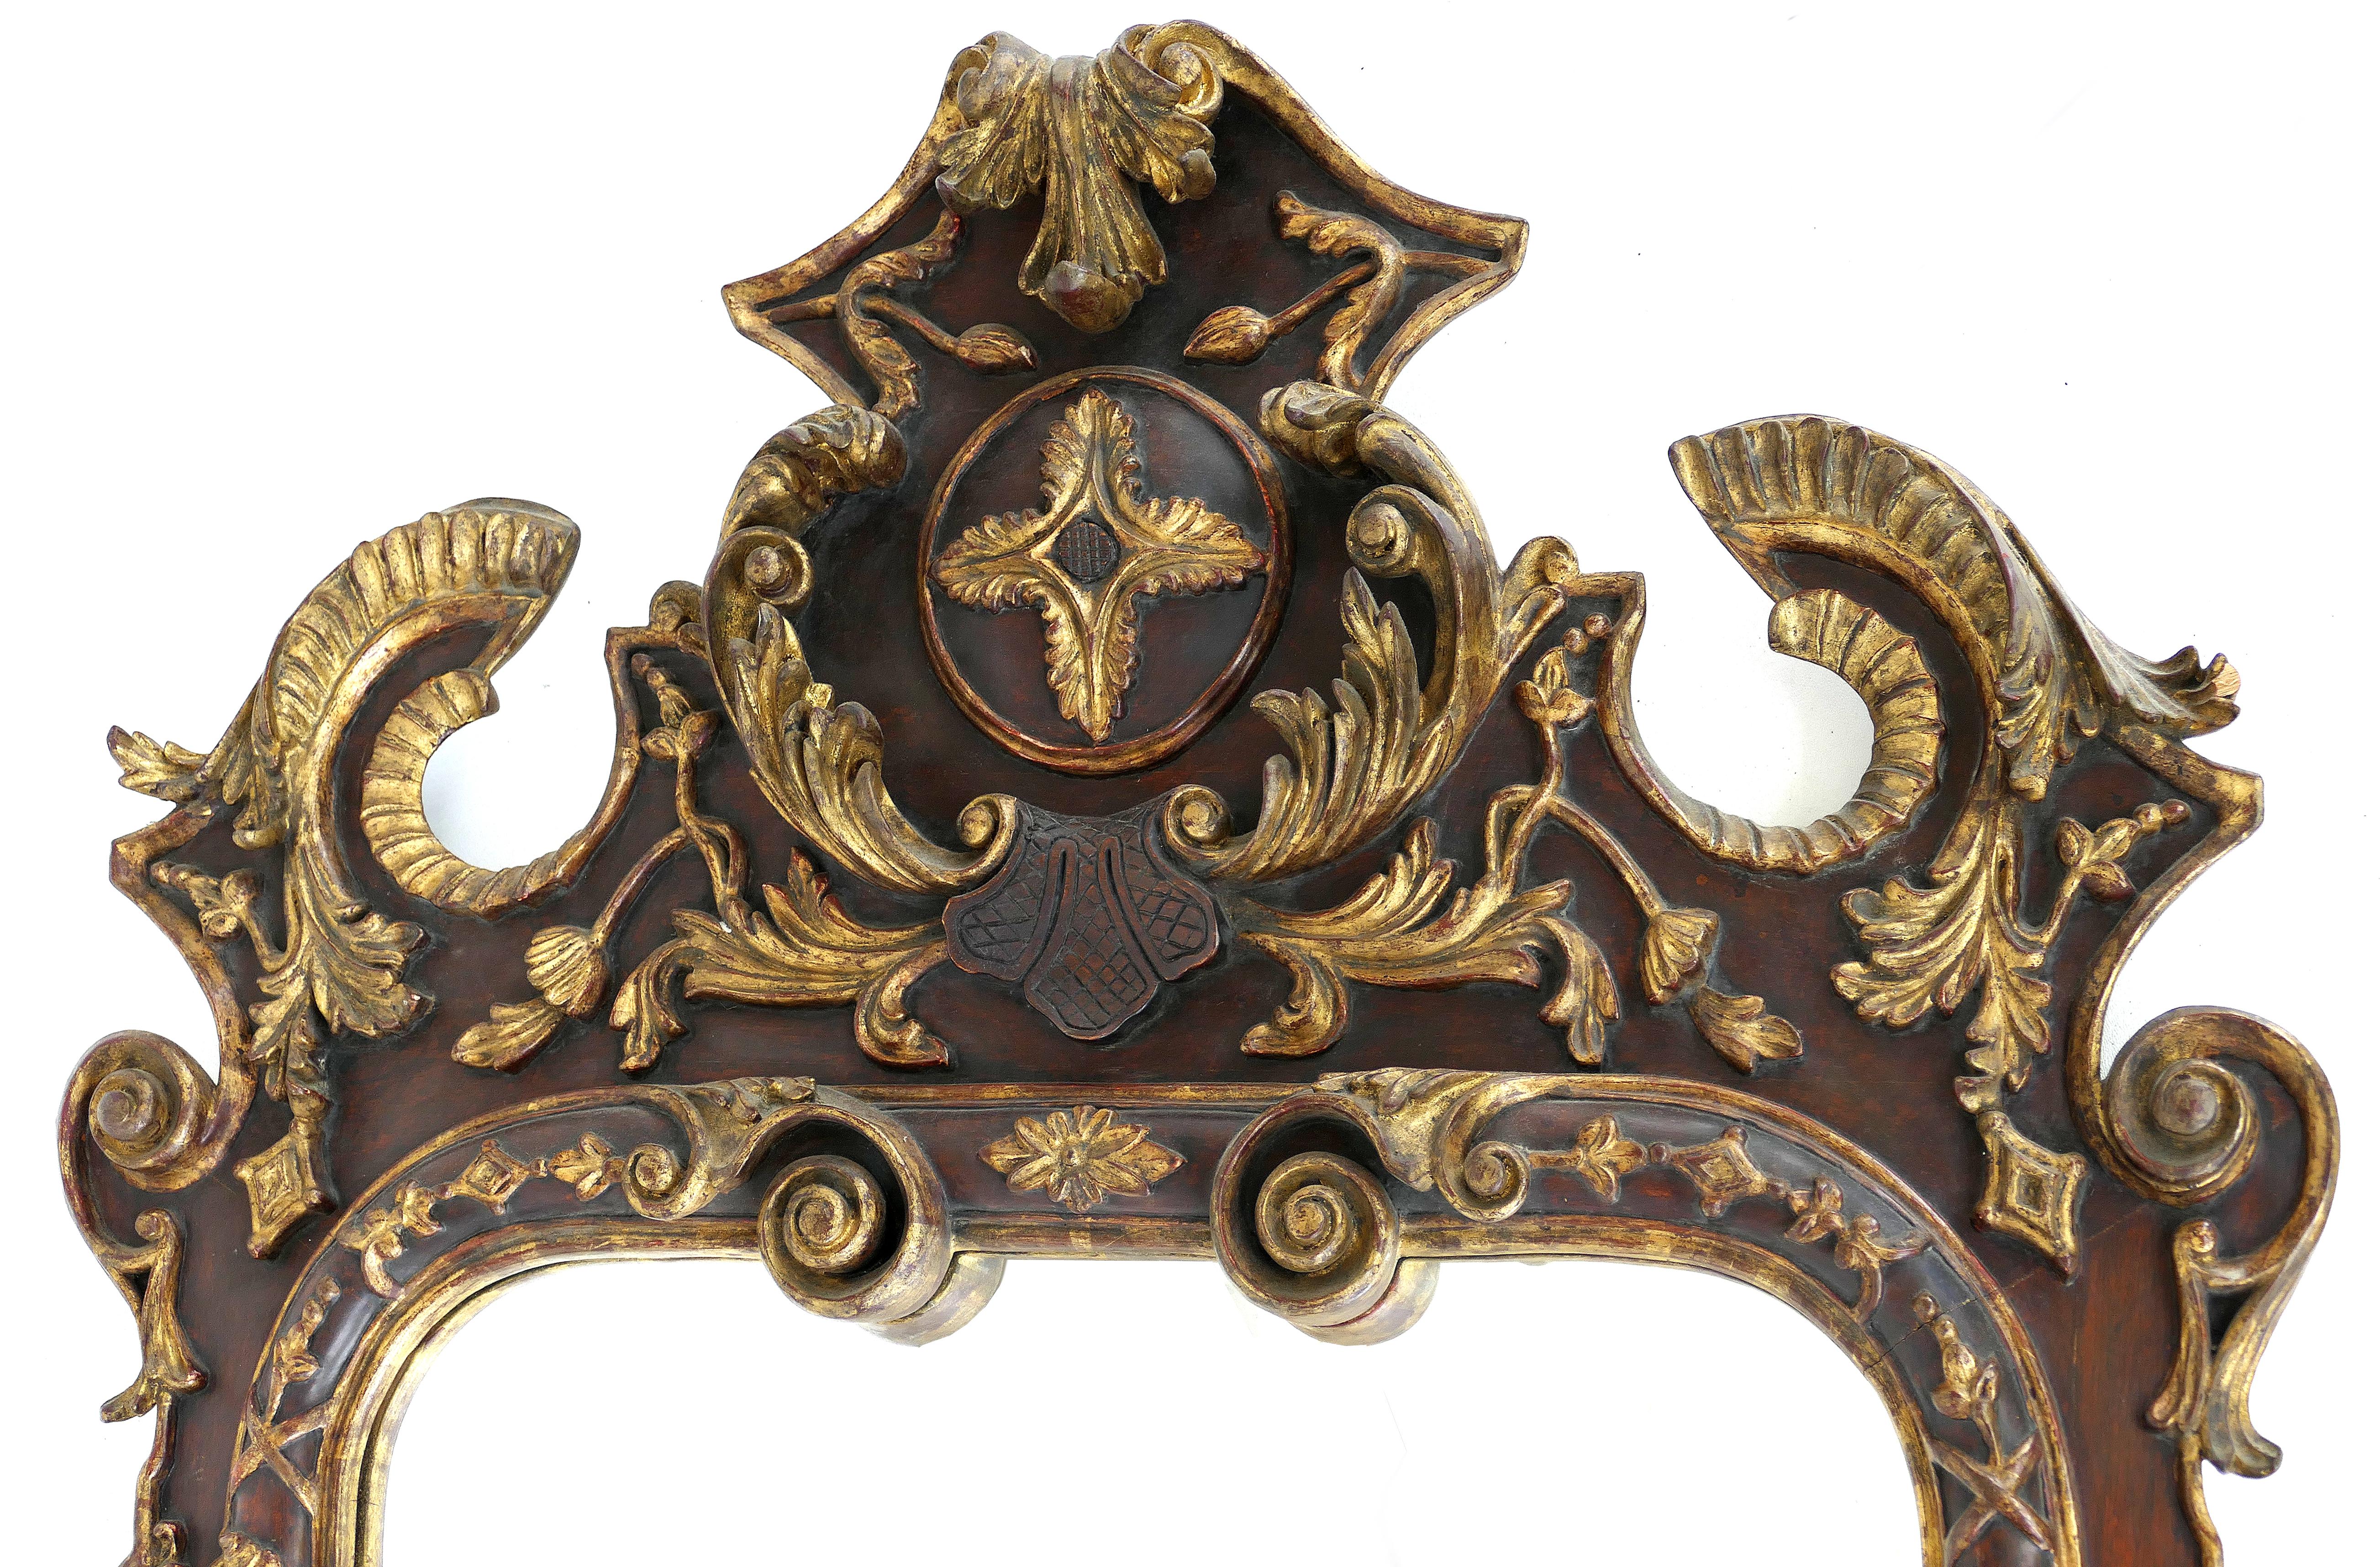 Offered for sale is an ornate heavily carved European giltwood mirror. The sides of this elegant frame have fluted columns with carved Corinthian capitals and bases. The upper and lower portions are embellished with carved and gilt acanthus leaf